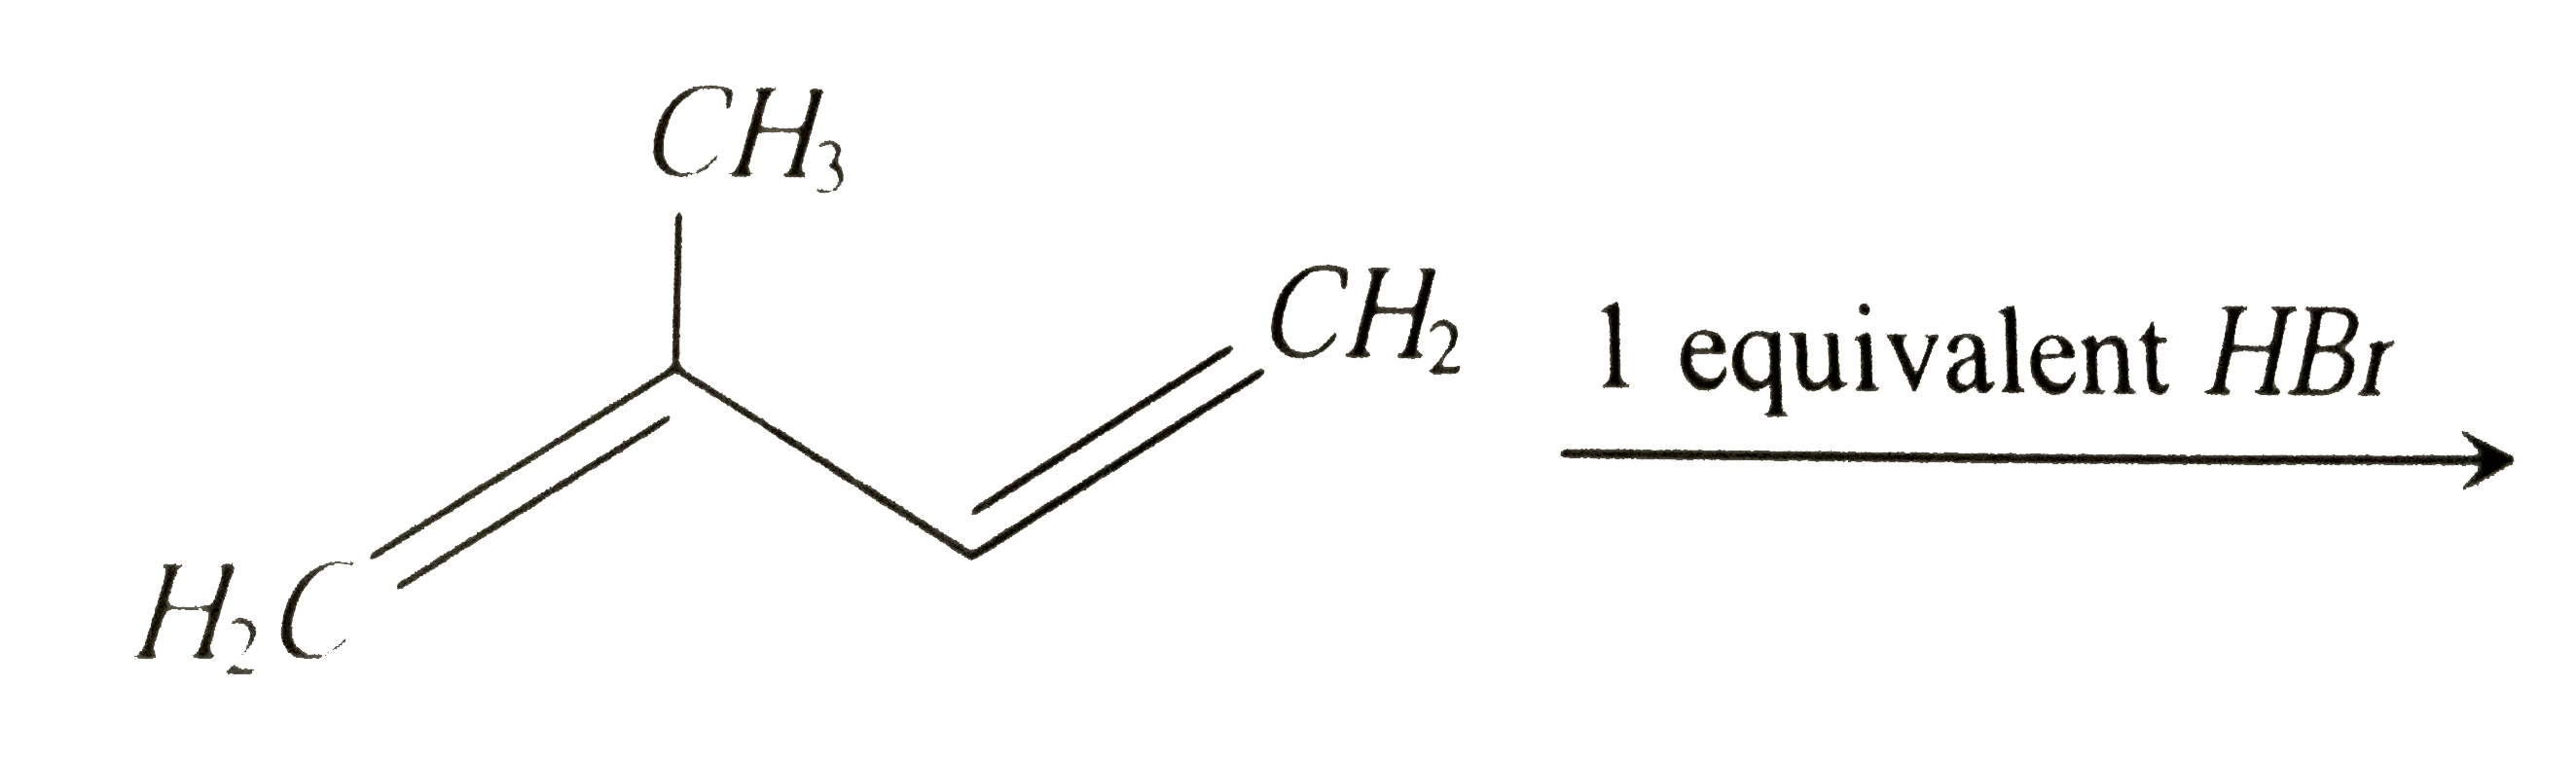 In the following reaction, the major product is